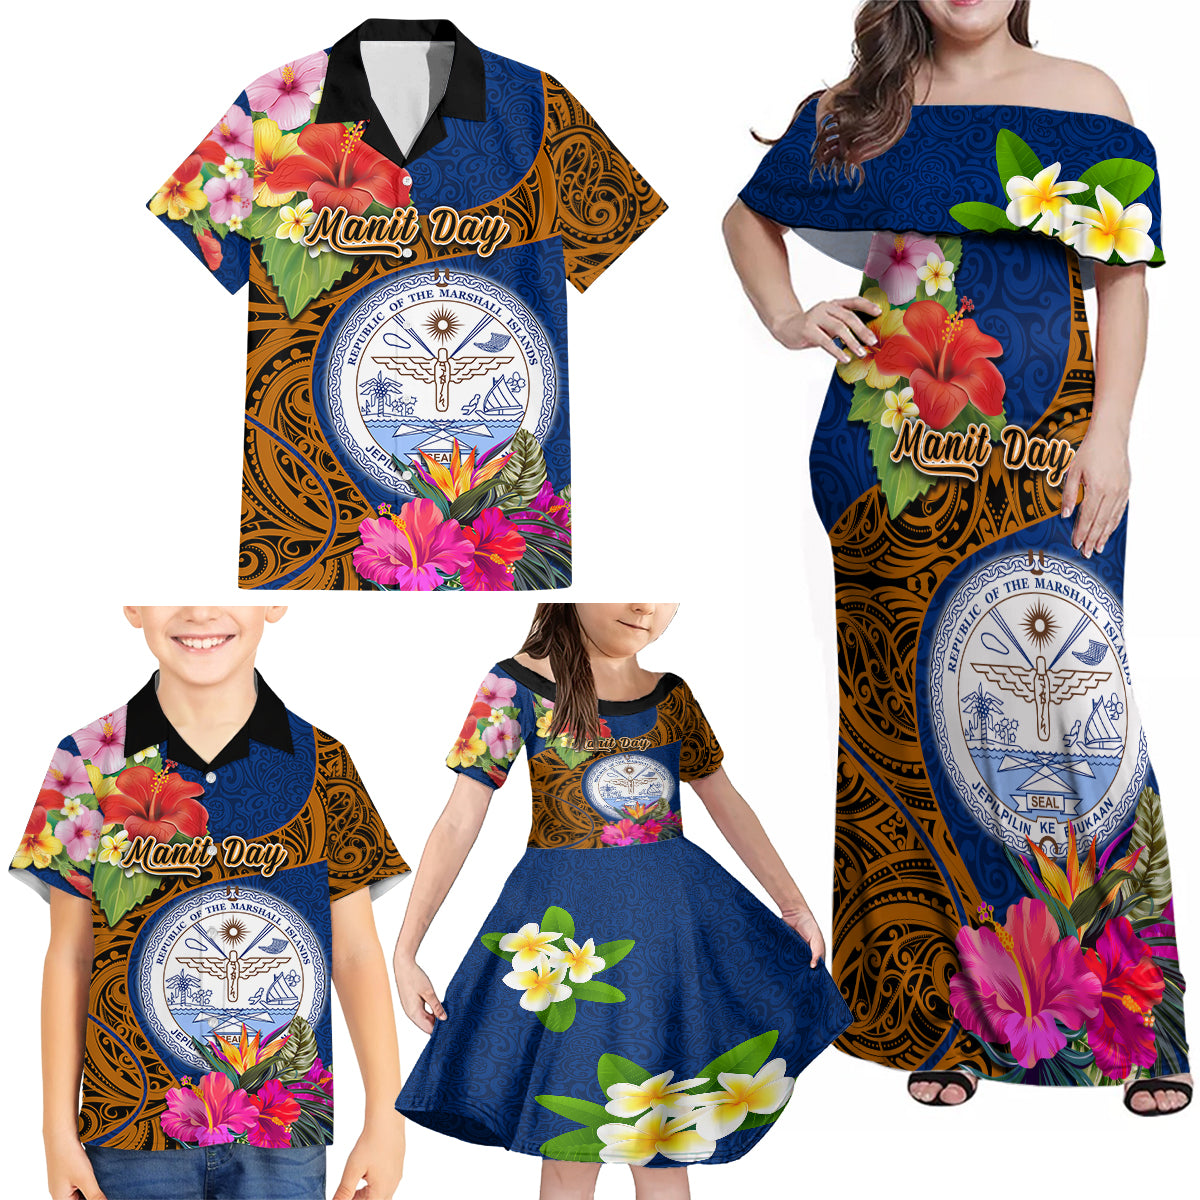 marshall-islands-manit-day-family-matching-off-shoulder-maxi-dress-and-hawaiian-shirt-marshall-seal-mix-hibiscus-flower-maori-pattern-style